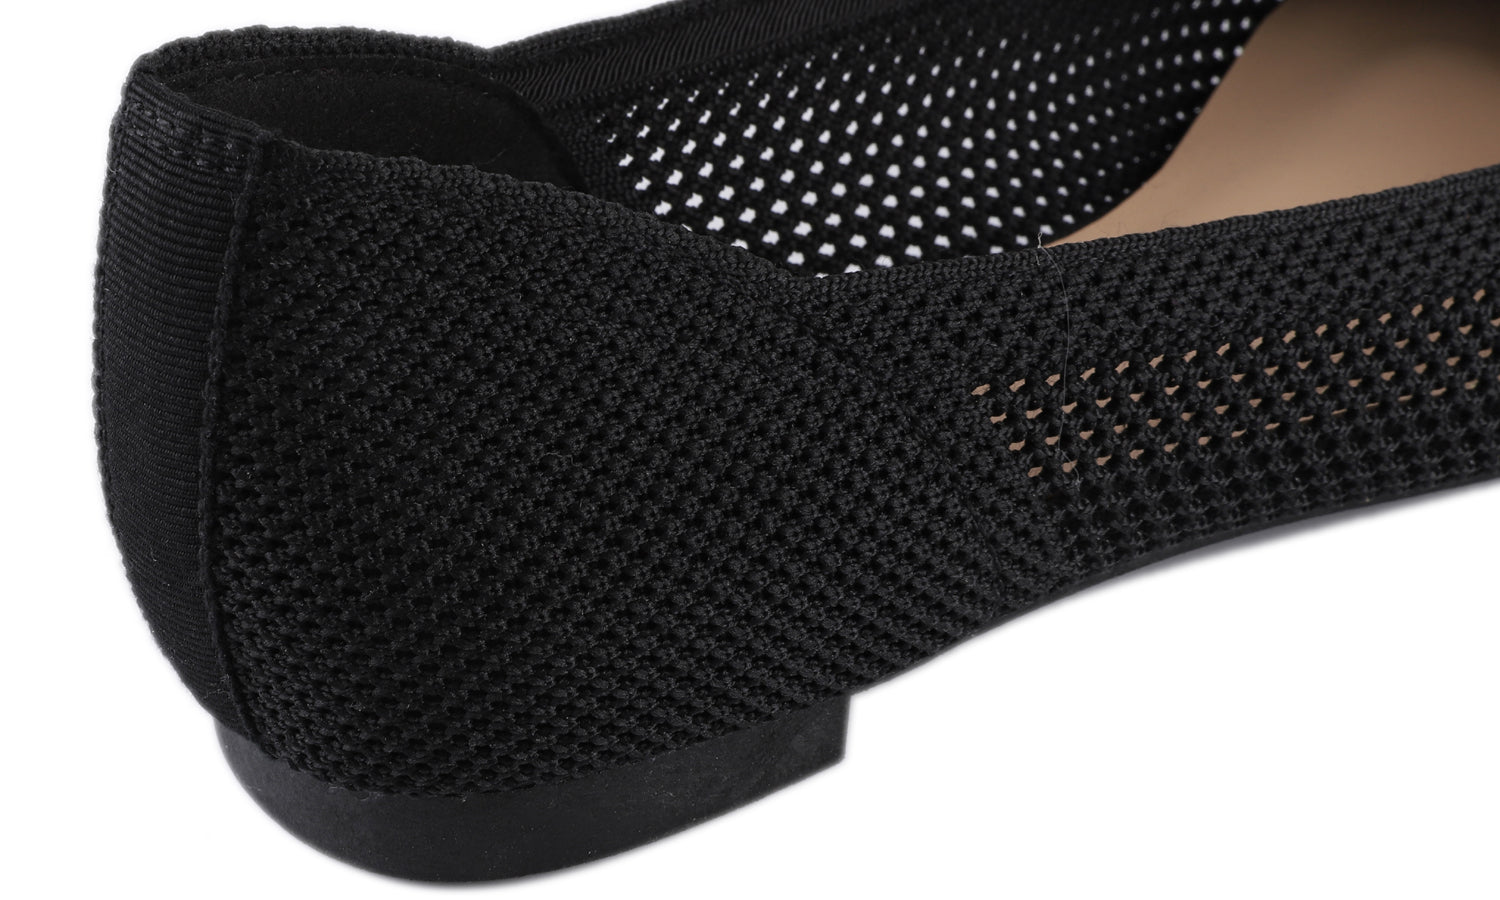 Feversole Women's Woven Fashion Breathable Knit Flat Shoes Pointed Black